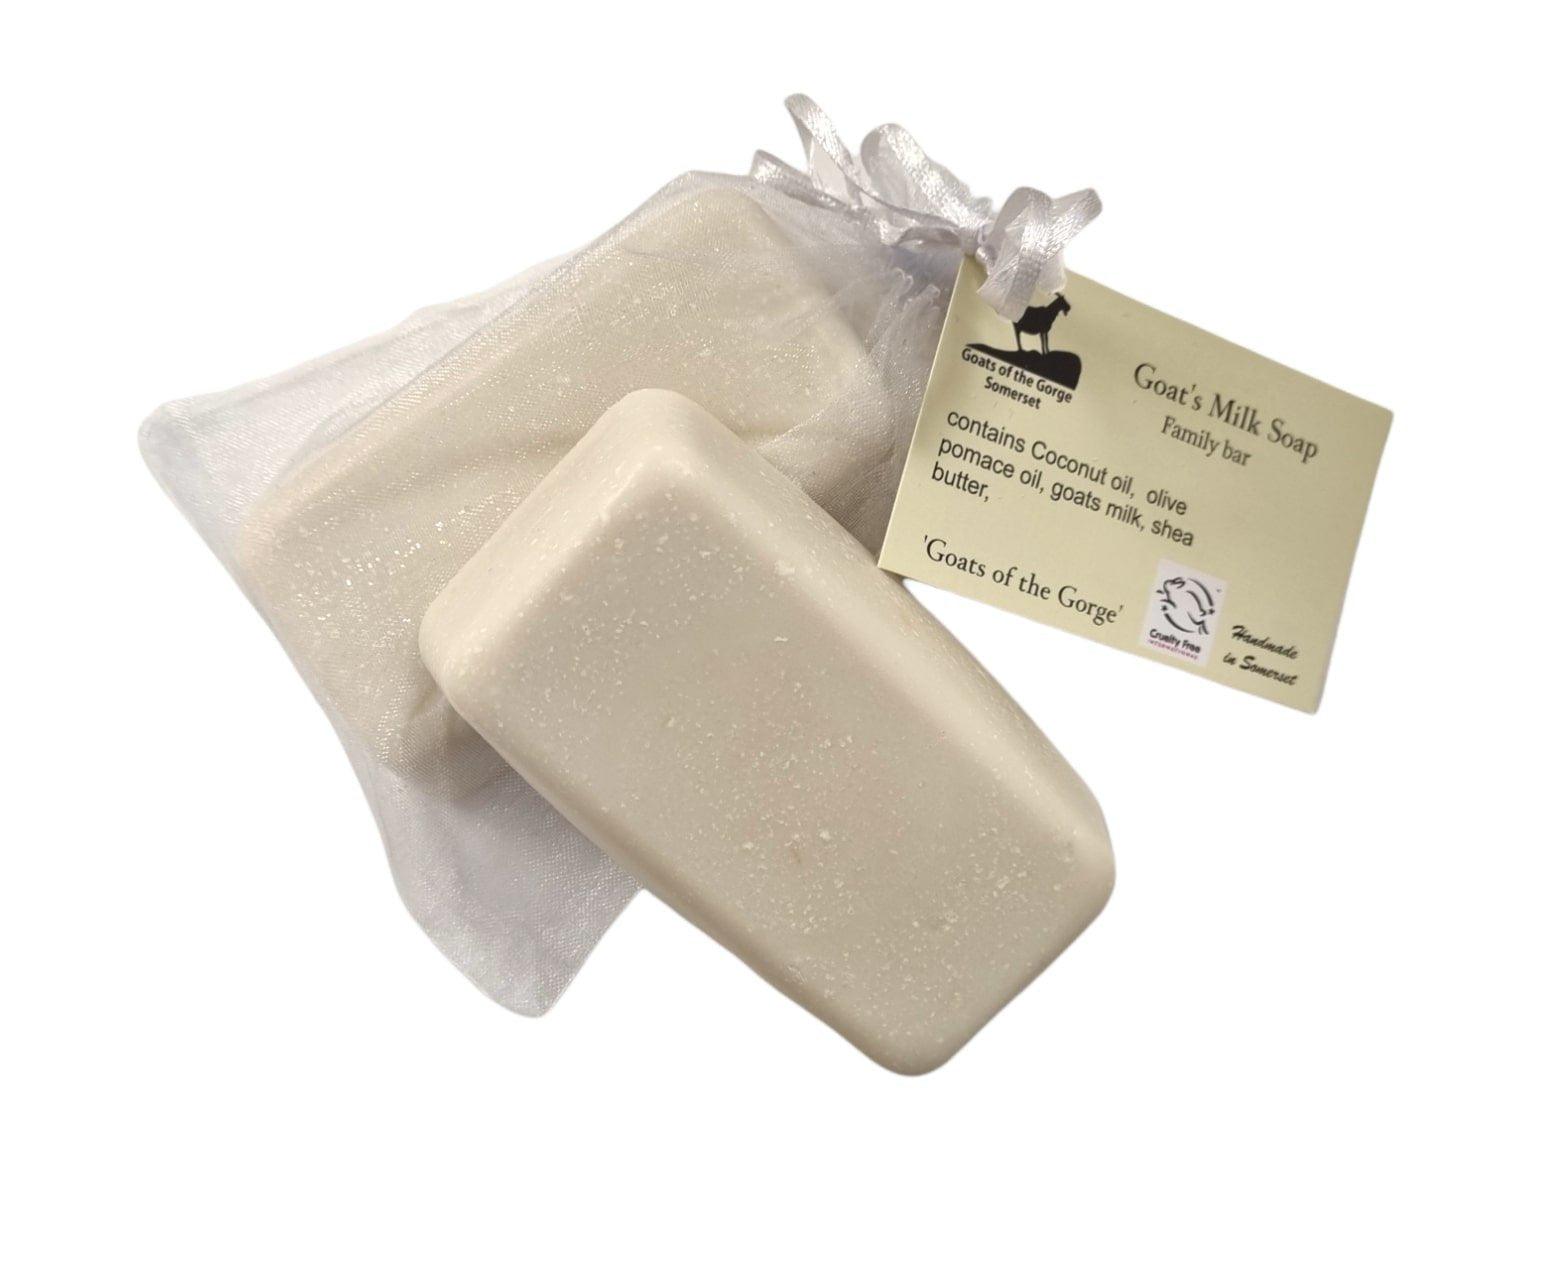 View Goats Milk Family Size Soap information